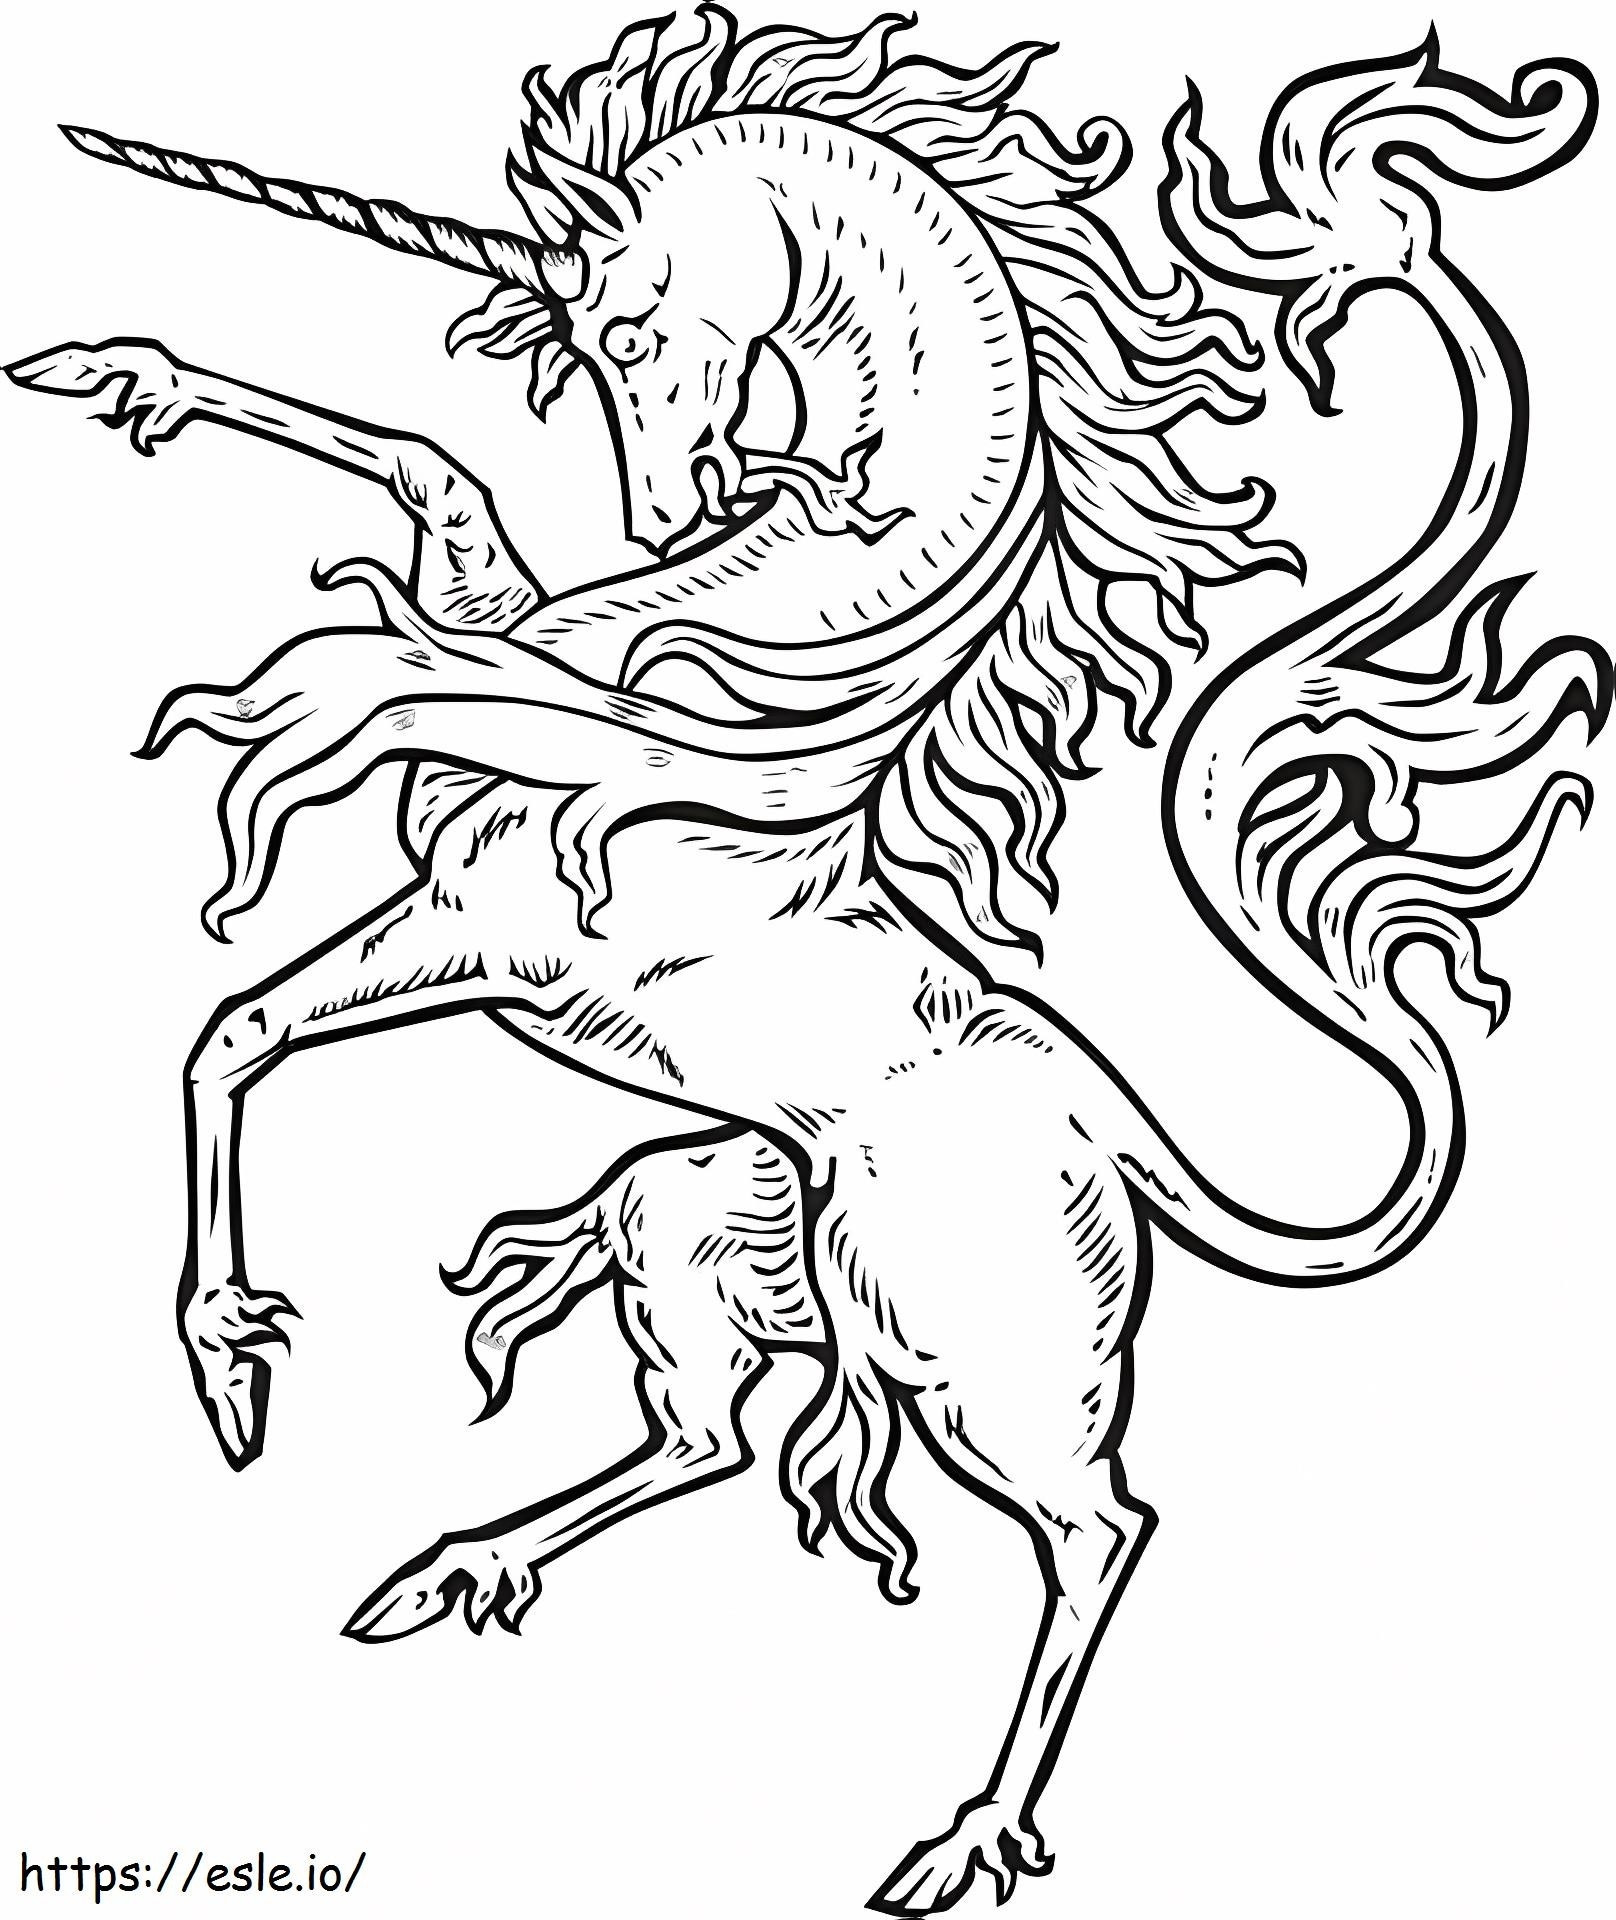 1528876594 Unicorn By Marcosramoscelis coloring page